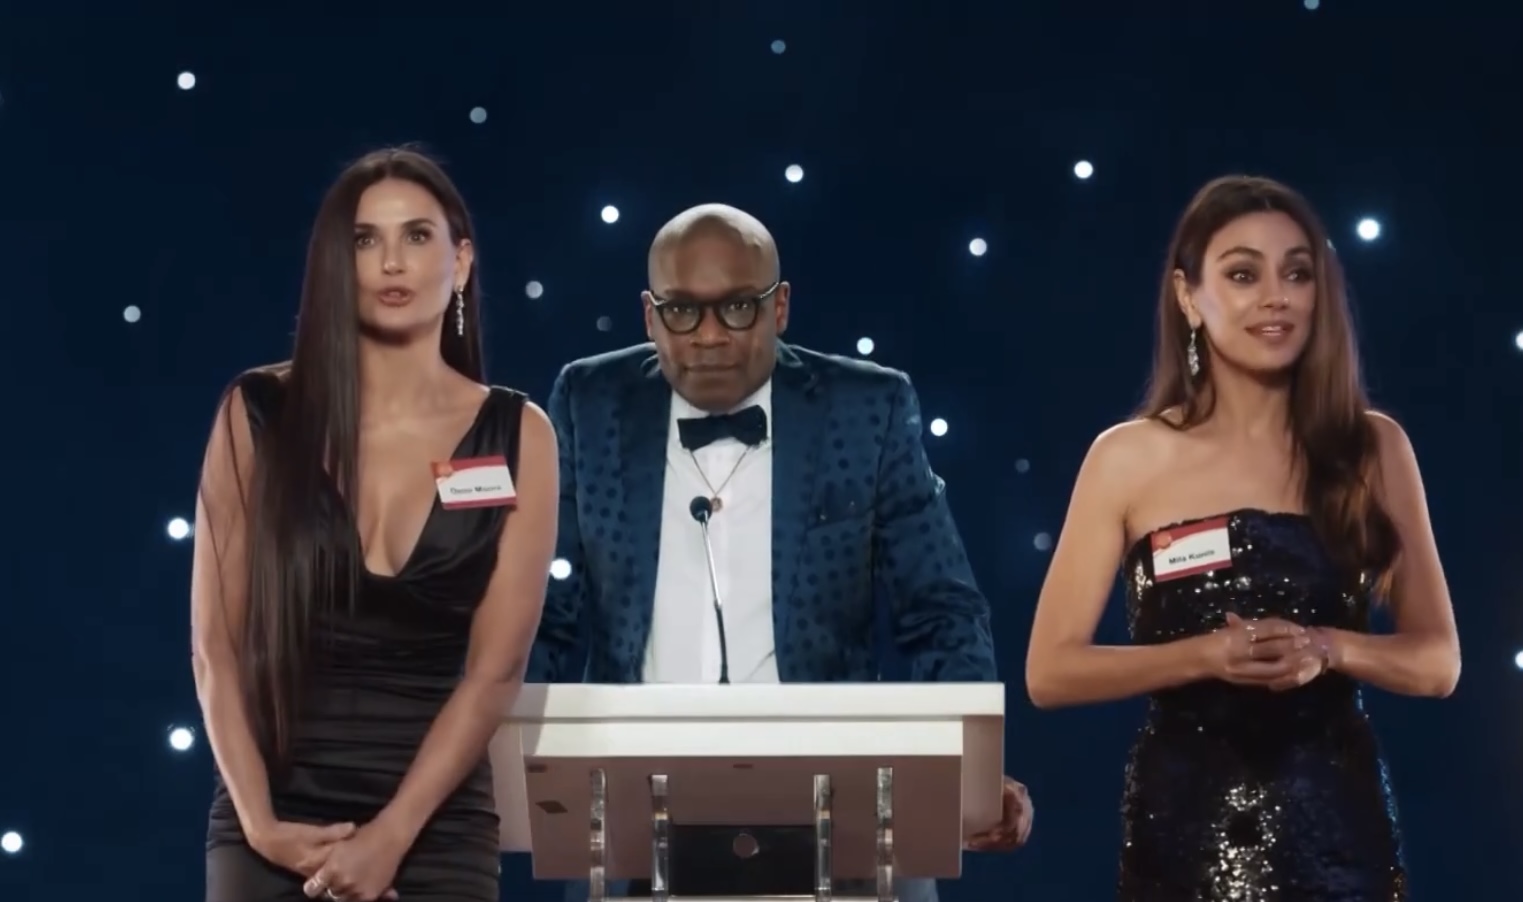 Mila Kunis & Demi Moore Joke That They Have ‘A Lot In Common’ In New AT&T Commercial Together